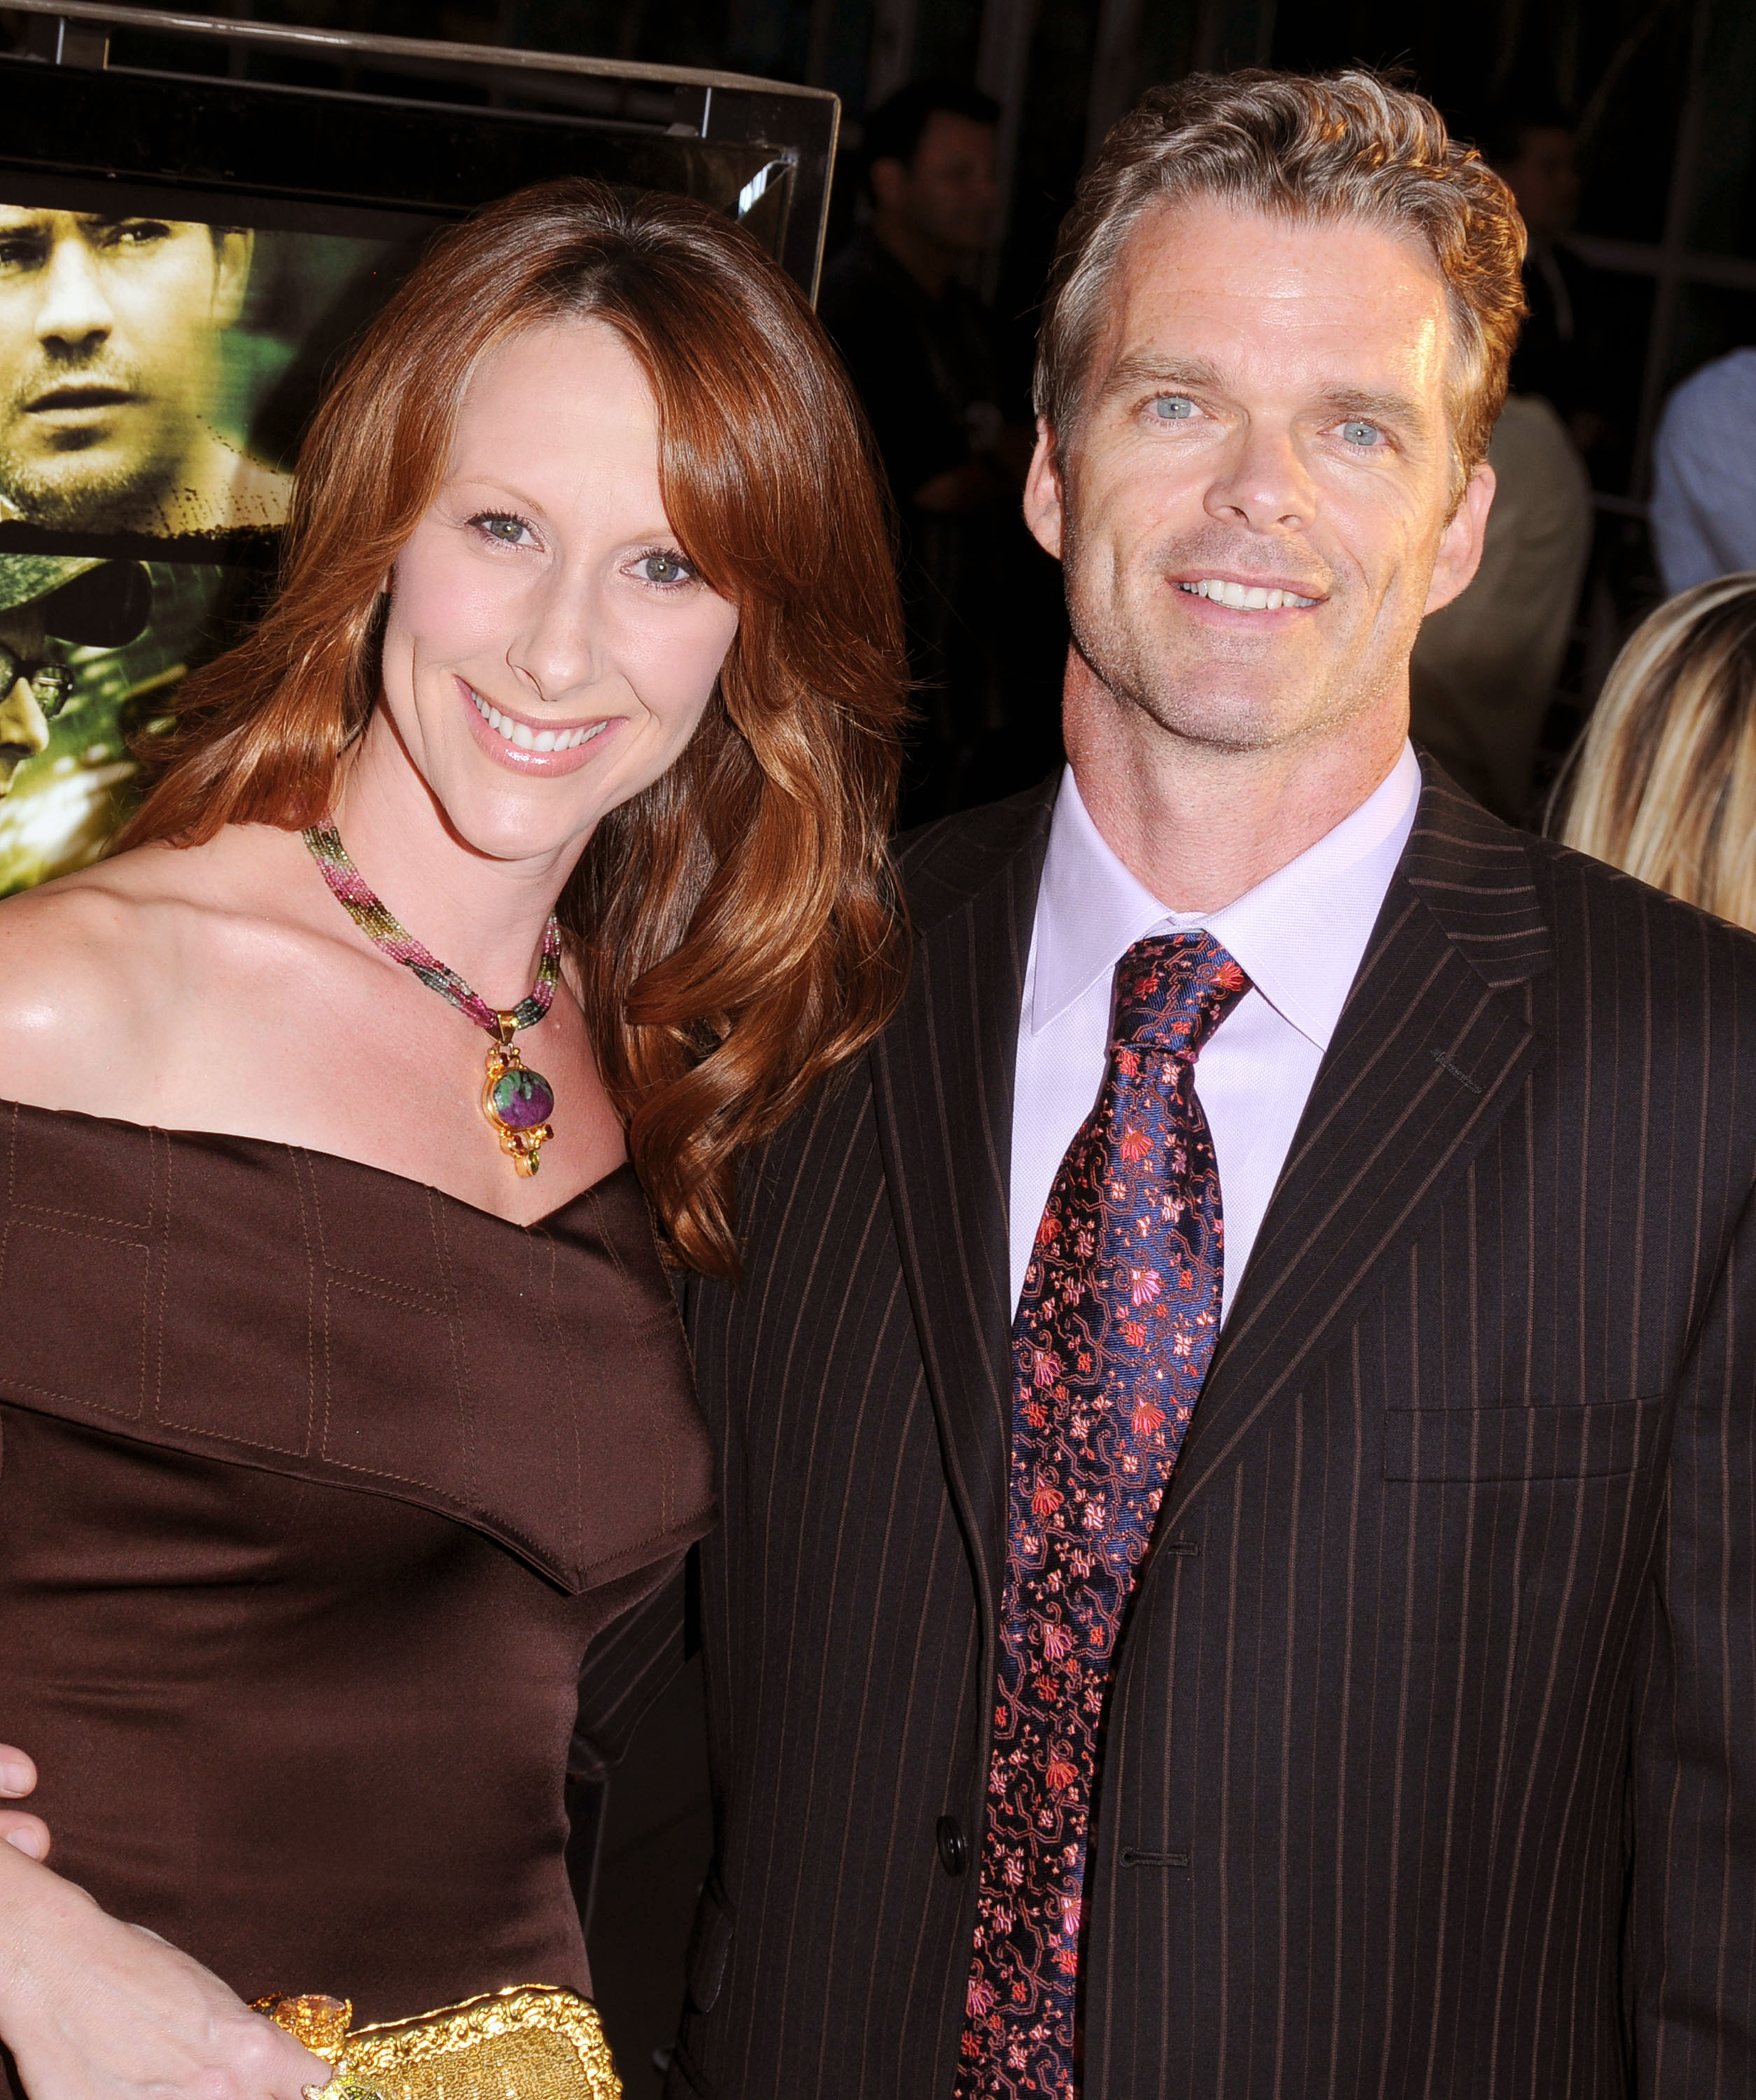 Wendy Braun and Josh Coxx at the premiere of A Perfect Getaway.